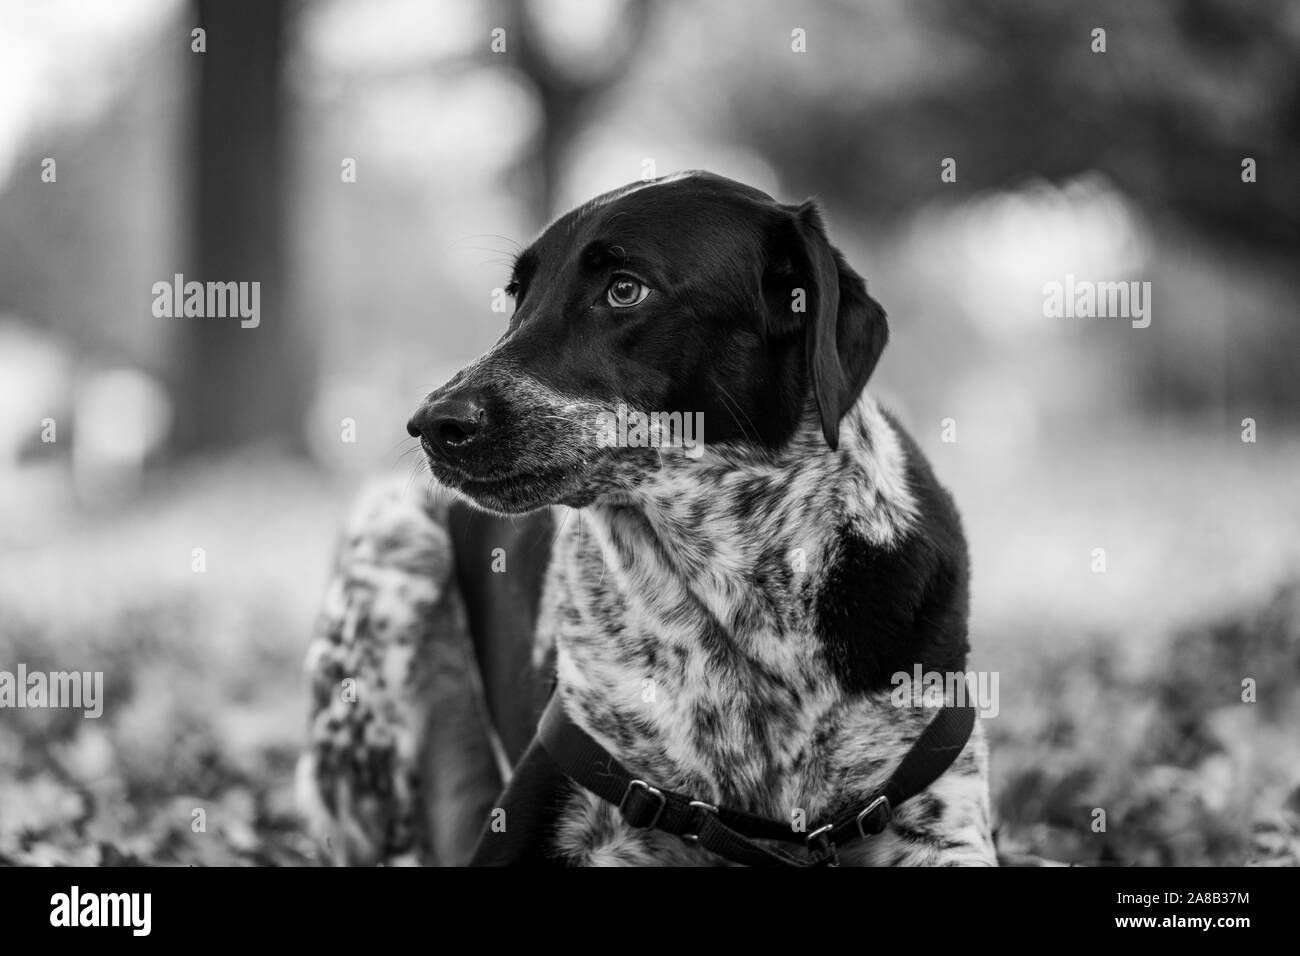 Black and white dog laying in autumn leaves with its mouth open. Black and white. Stock Photo